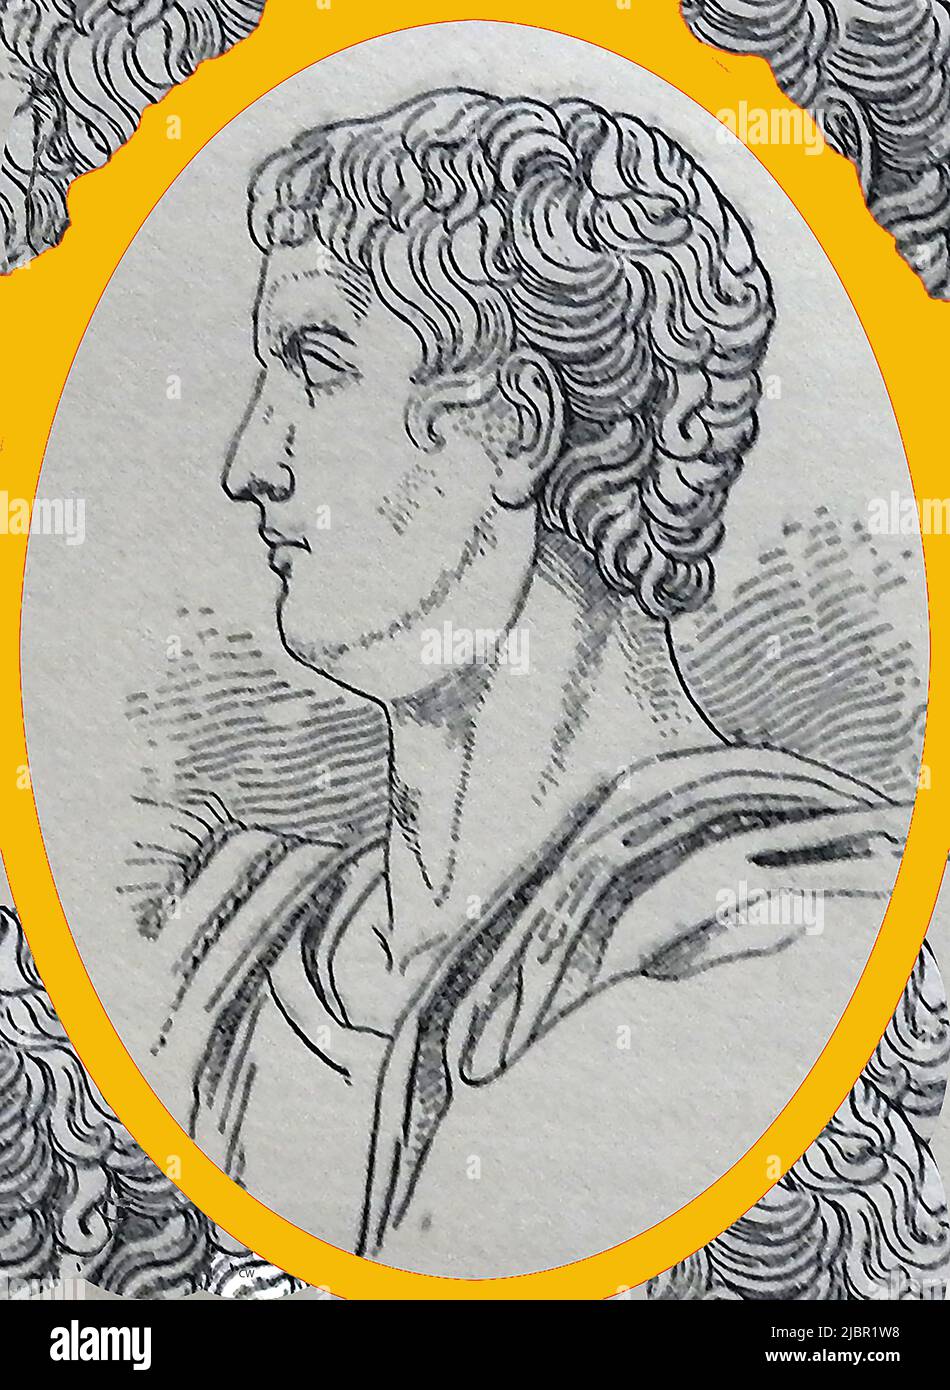 A late 19th century portrait of (Caius or Guius) Caesar Augustus Germanicus (12 AD -41 AD), nicknamed Caligula. He was born Gaius Julius Caesar but  acquired the nickname Caligula meaning little caliga, ( a type of military boot) from  those he wore when encountered by his father's soldiers during their campaign in Germania. His parents were Germanicus and Agrippina the Elder. He died by assassination in a joint conspiracy by  Praetorian Guard officers, senators, and courtiers Stock Photo